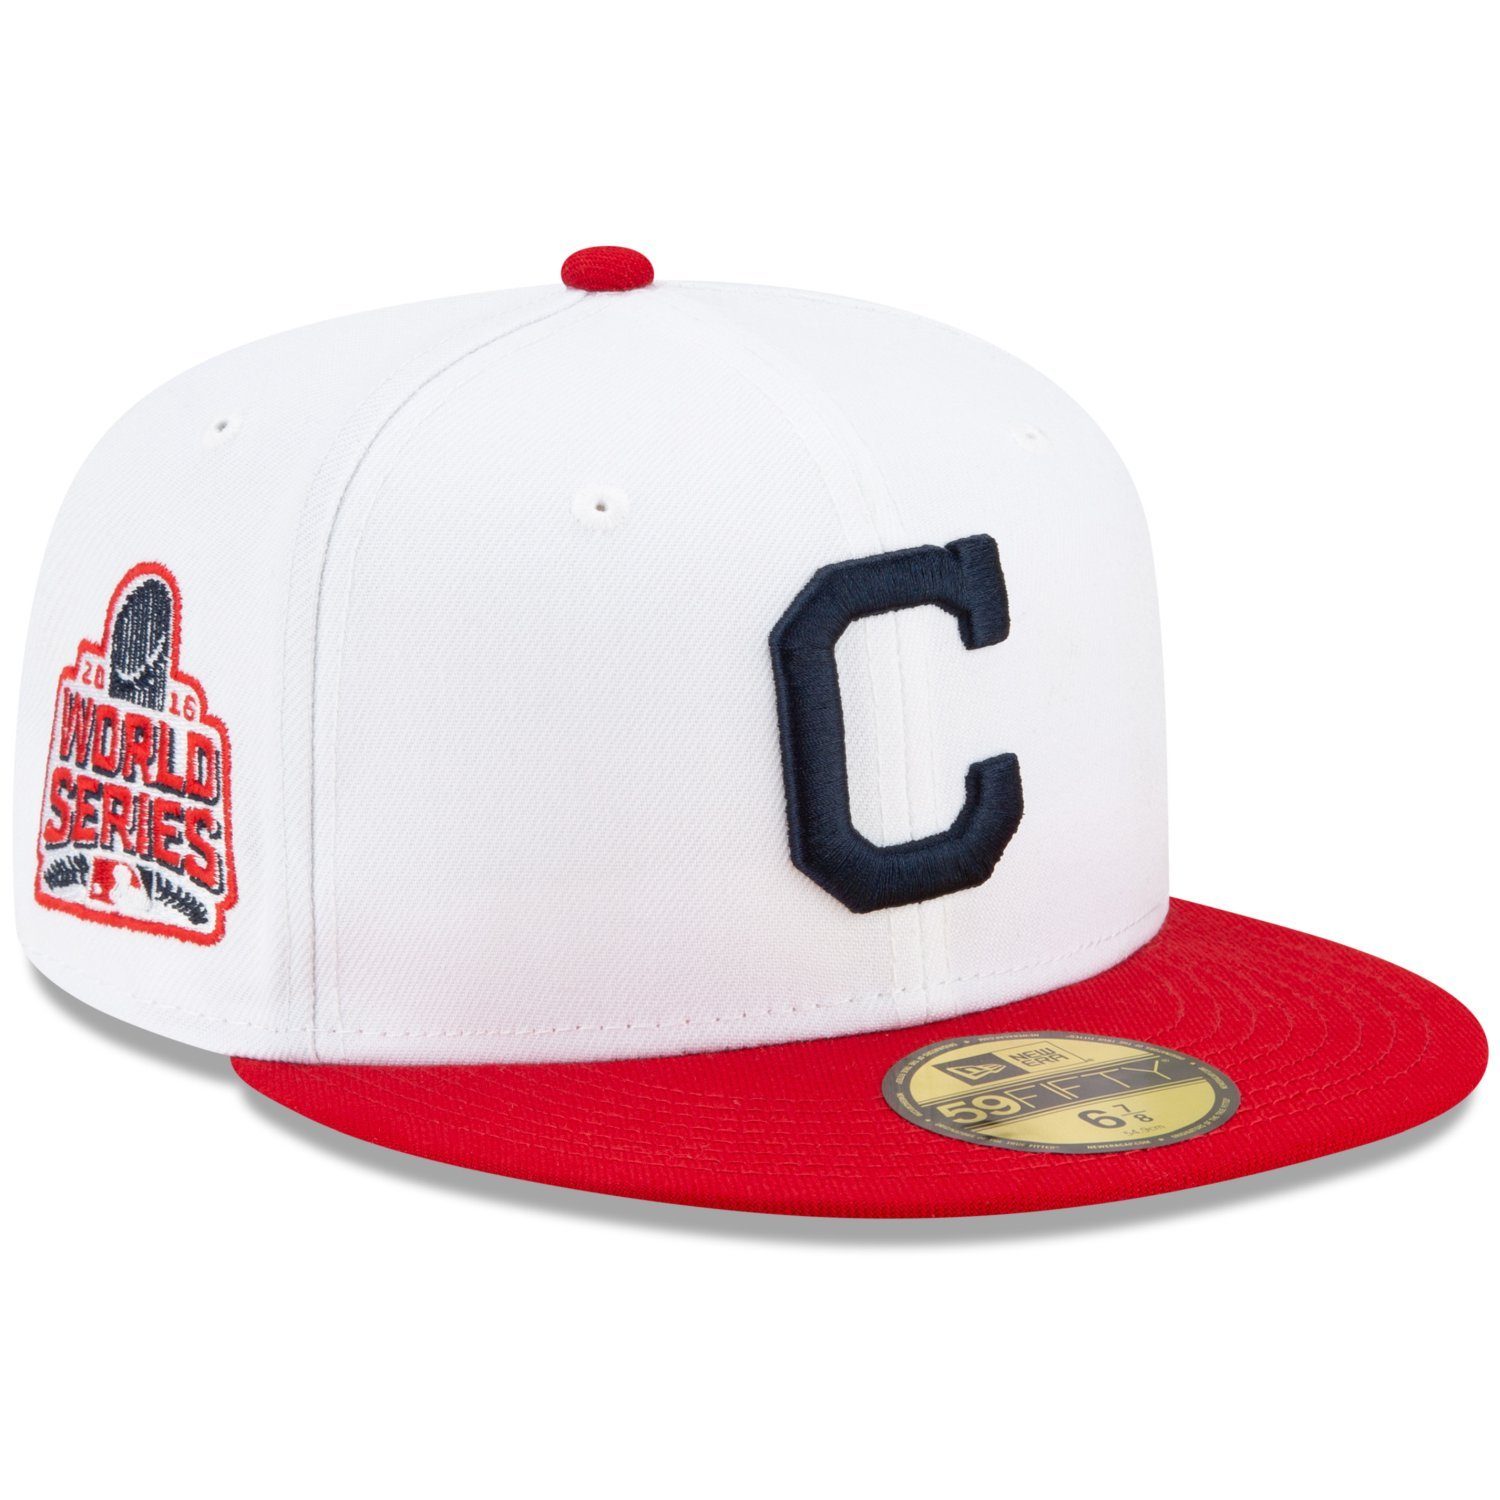 New Era Fitted Cap 59Fifty WORLD SERIES 2016 Cleveland Indians